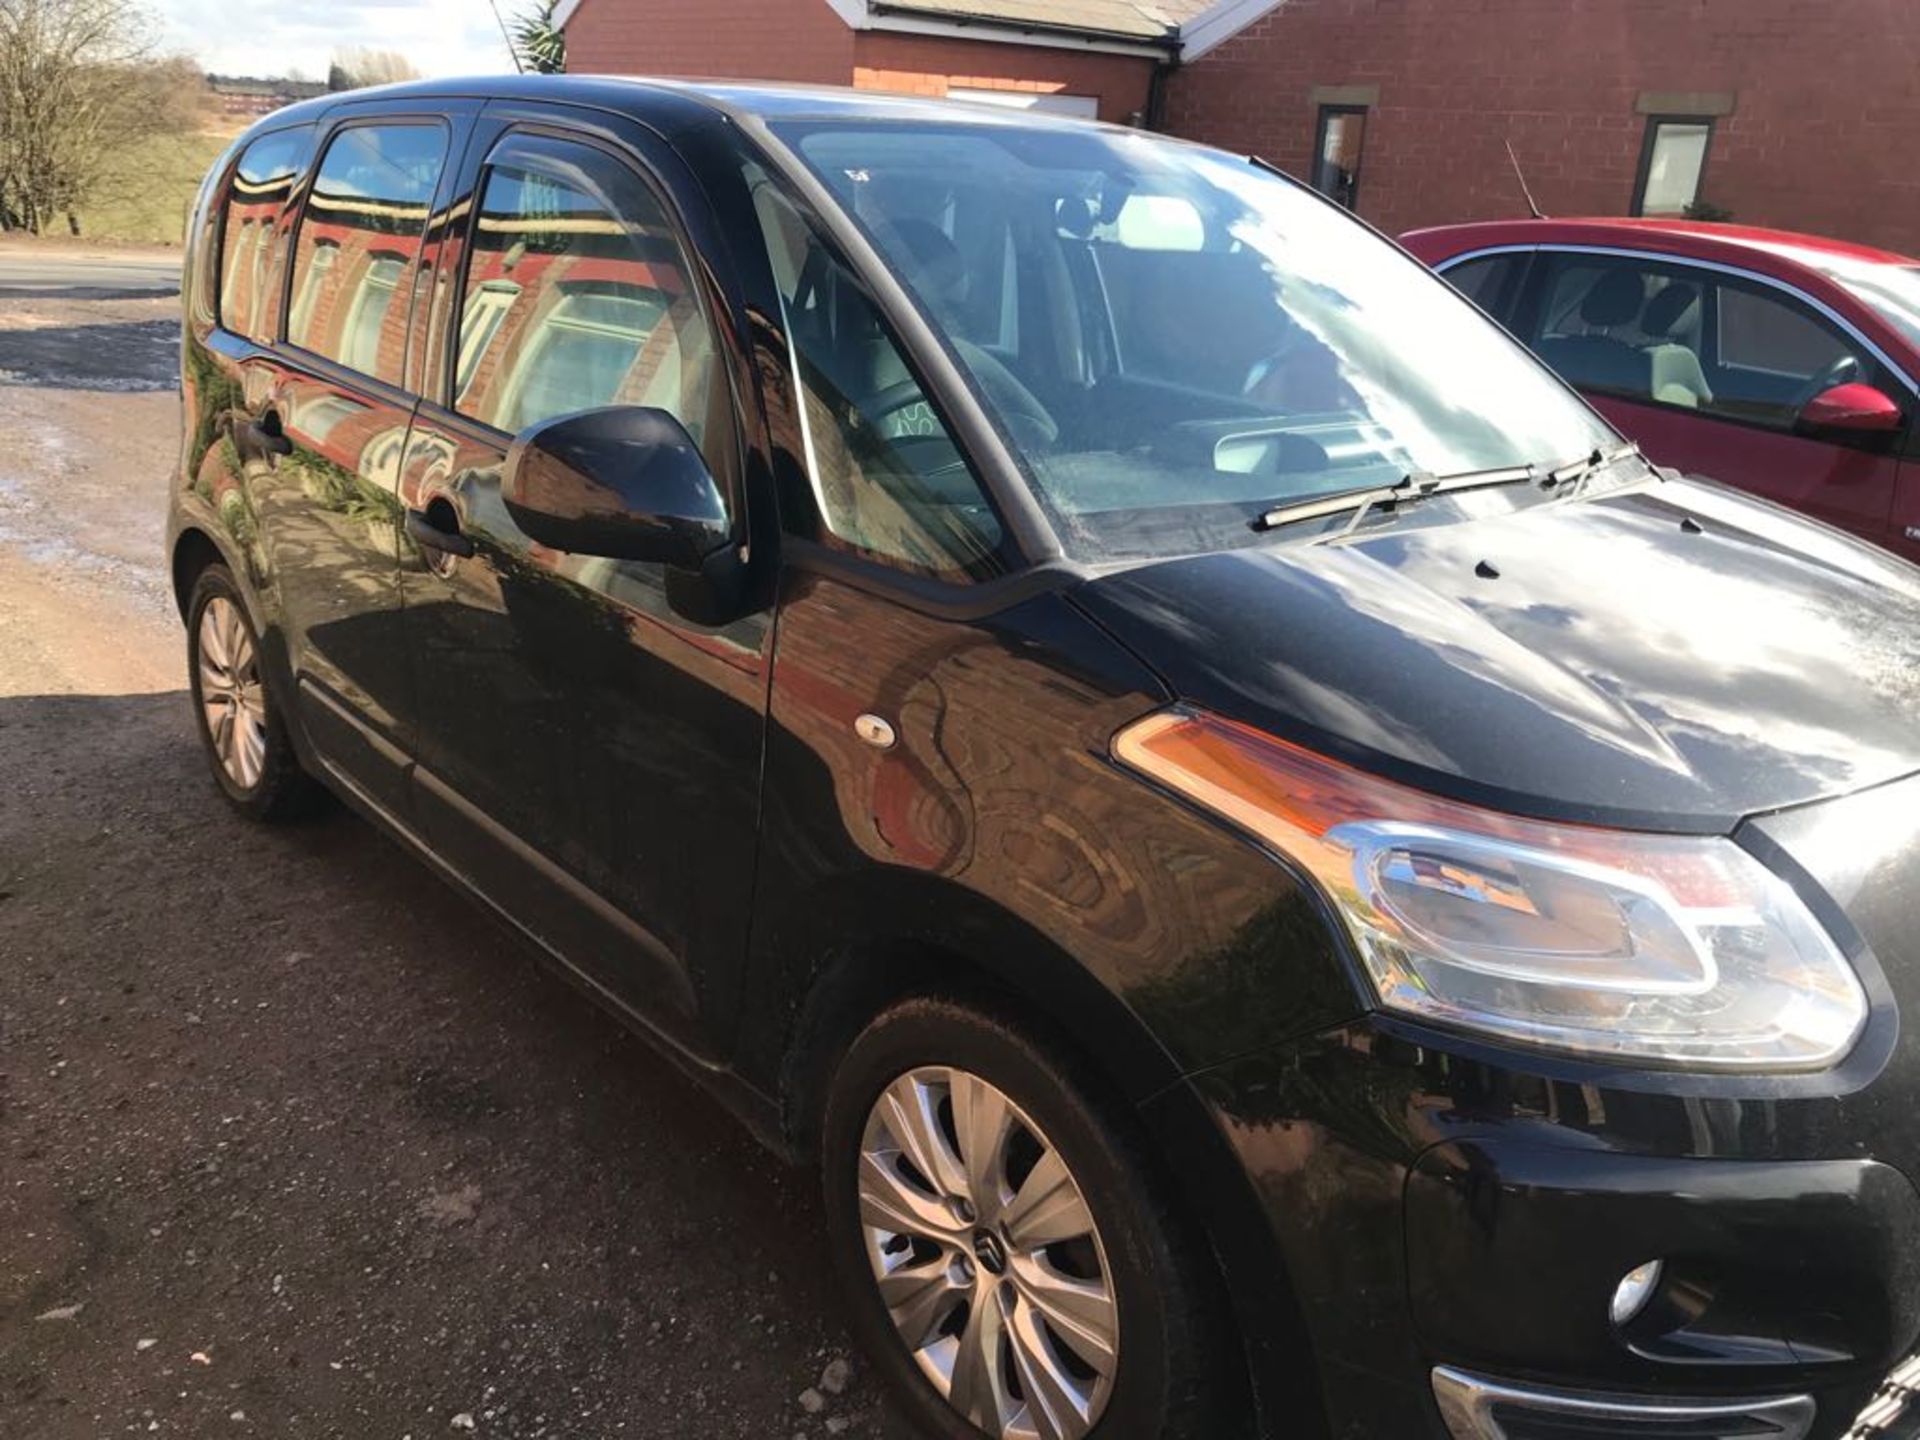 Citroen C3 Picasso VTR Plus HDI 1.6 Diesel Five Do - Image 2 of 4